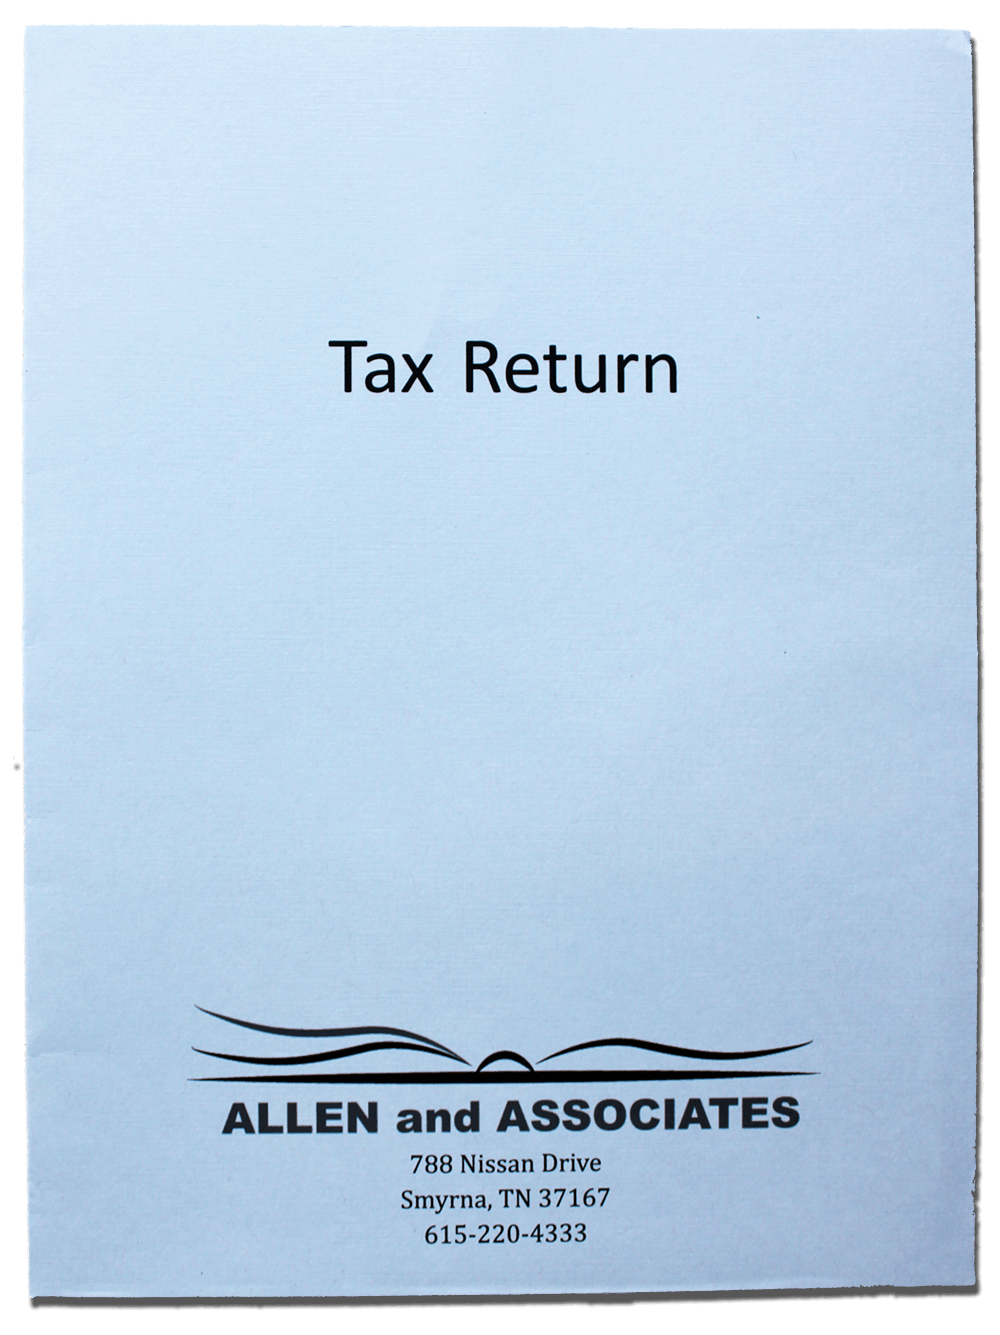 Personalized Tax Return Folders with Business Logo, Custom Printed with Logo - DiscountTaxForms.com